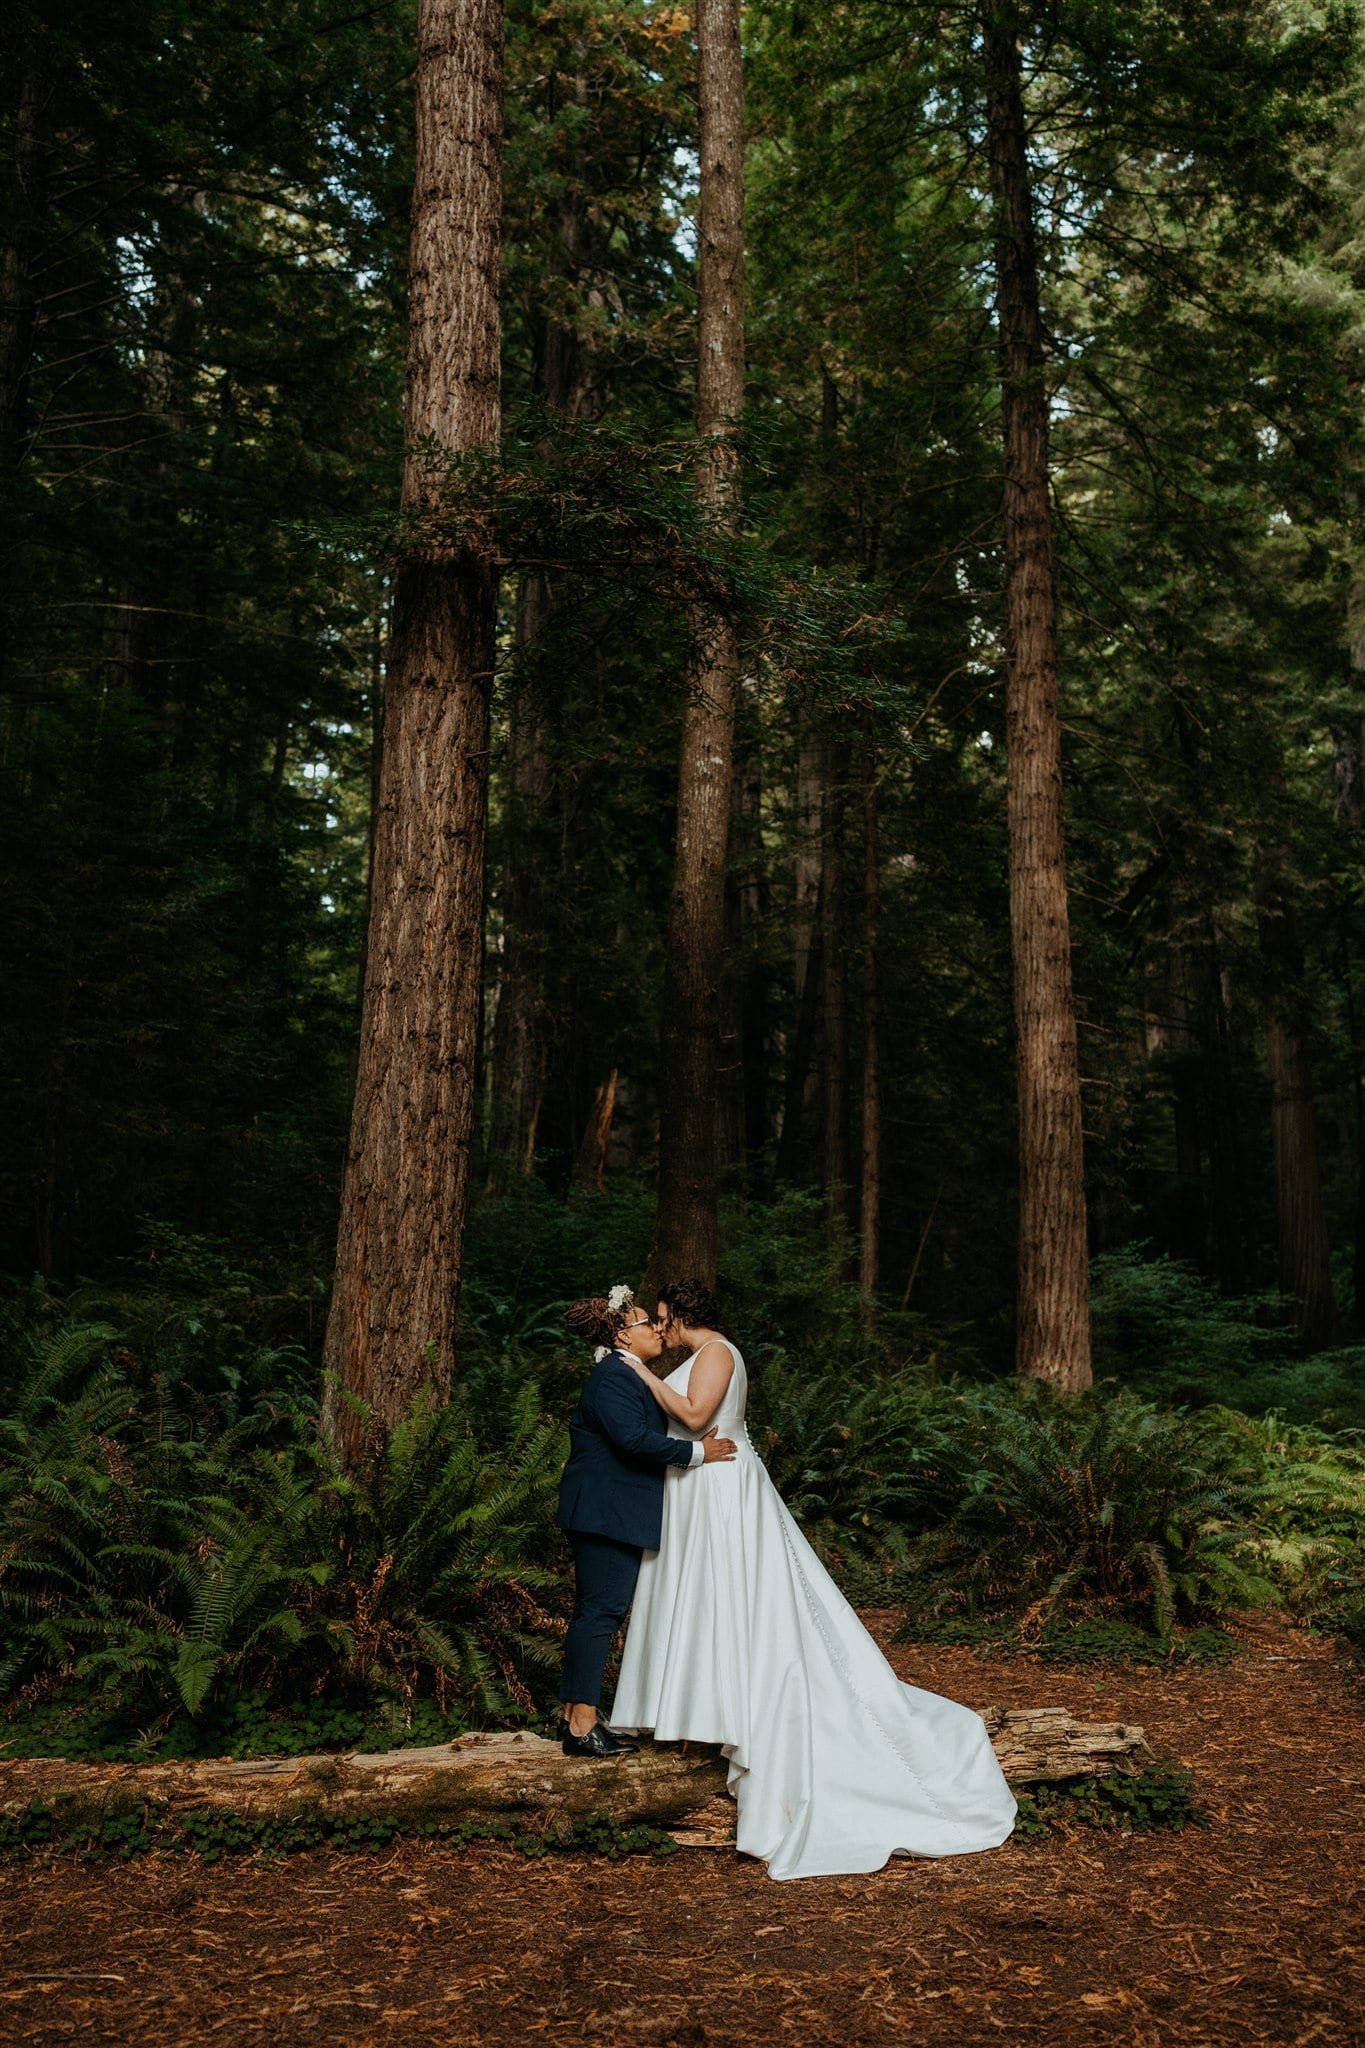 Brides kiss during forest elopement portraits in Oregon